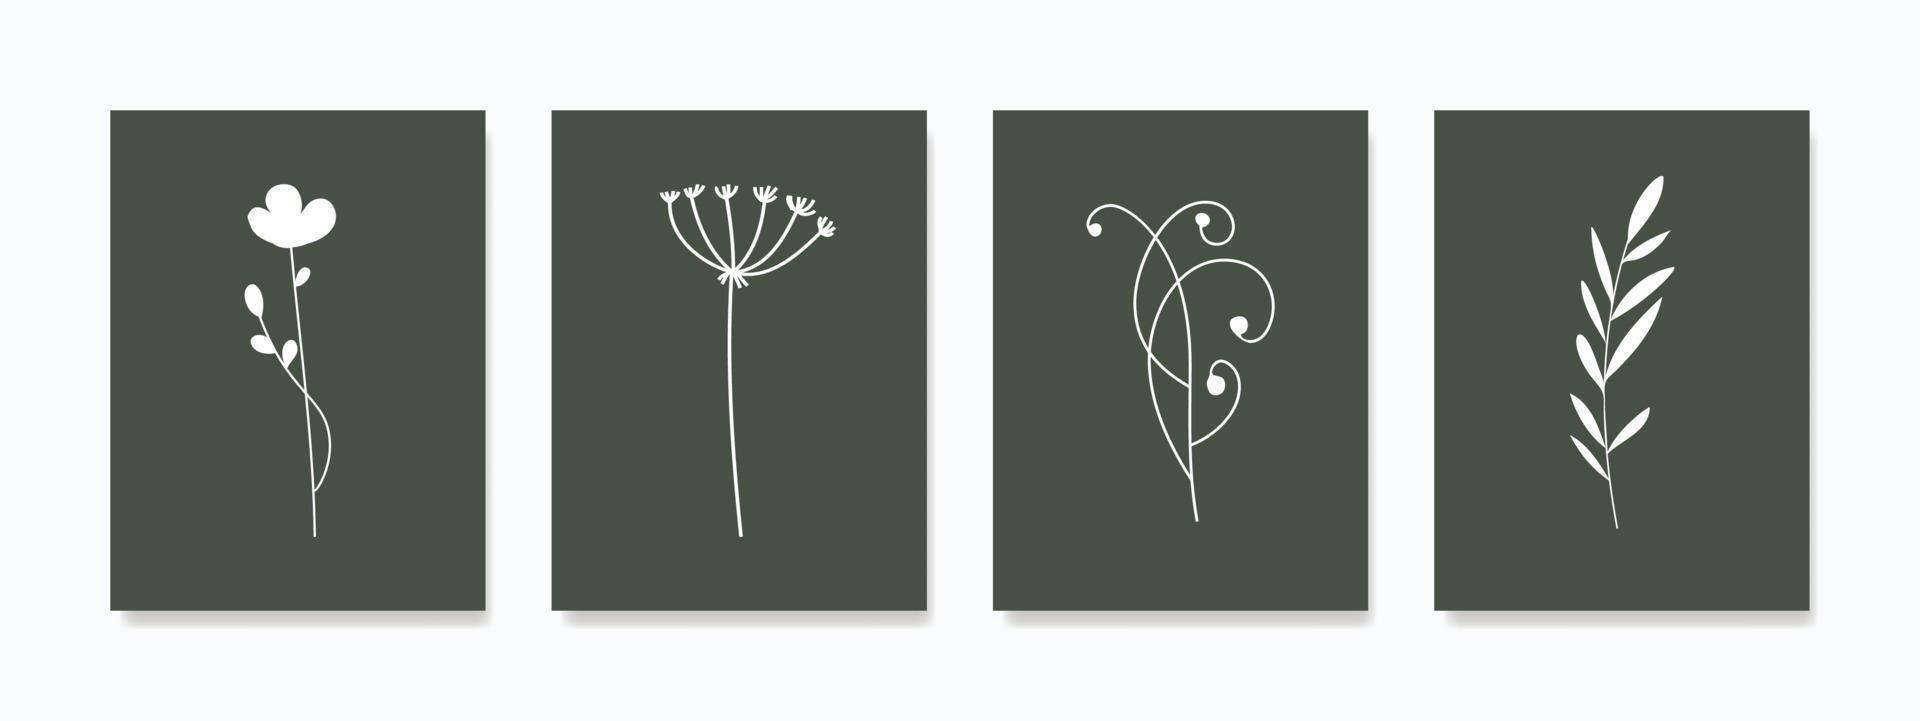 minimalist botanical wall art. Featuring hand-drawn organic shapes in natural colors, these designs are perfect for framed prints, canvas artwork, canvas prints, posters, and wallpaper. vector